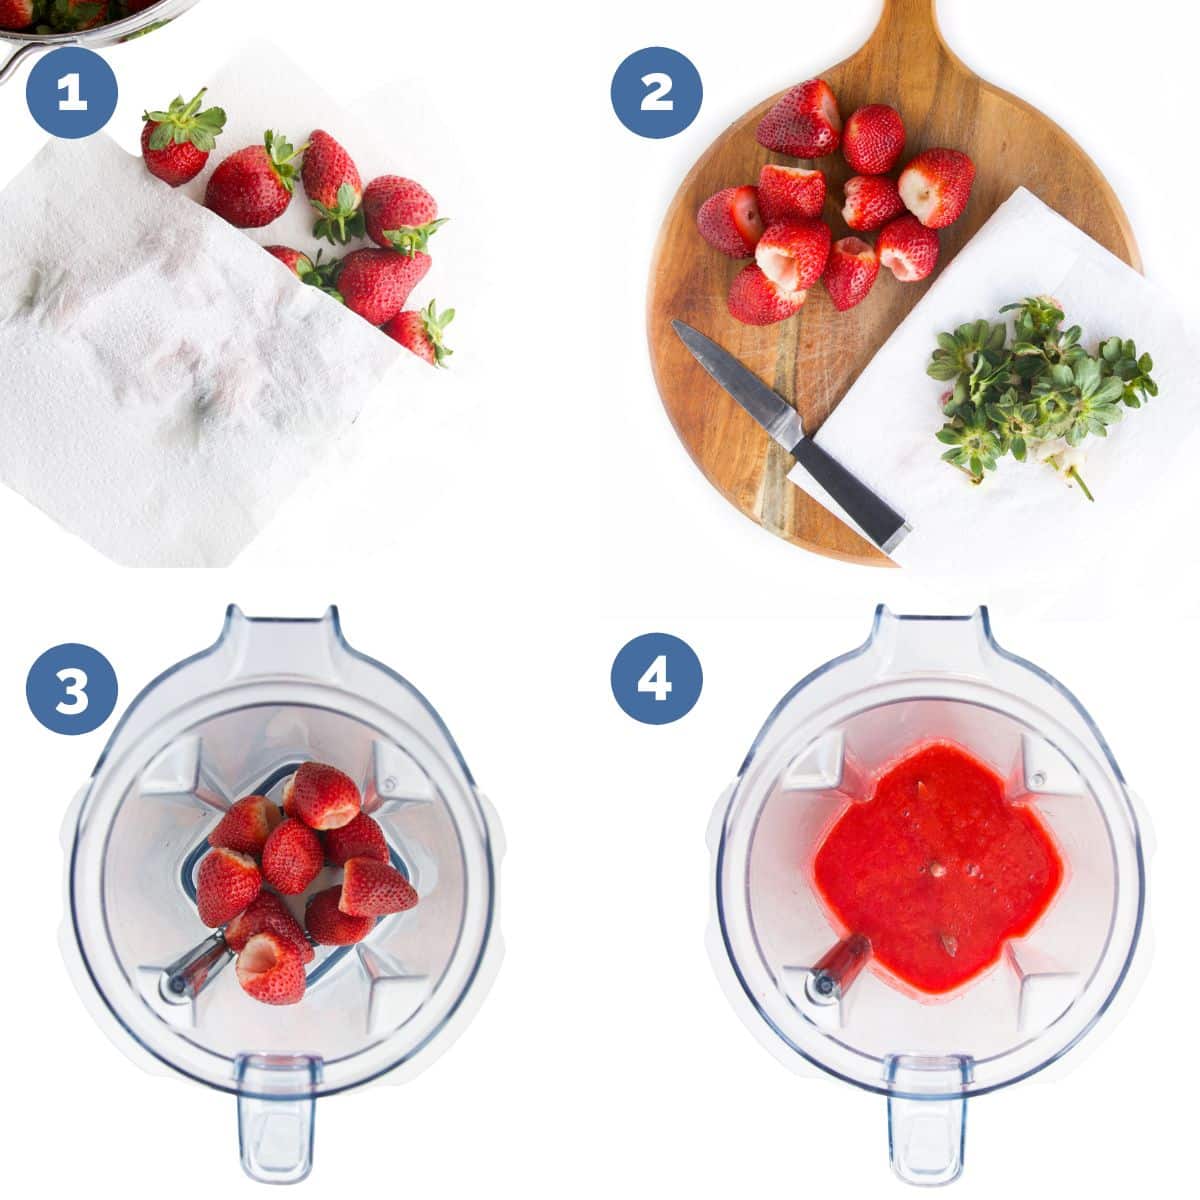 Collage of 4 Images Showing How to Make Strawberry Puree. 1 Strawberries Being Dried After Washing. 2. Strawberries on Wooden Boarded After Hulling. 3. Strawberries in Blender Before Blending 4. Strawberries in Blender After Blending. 